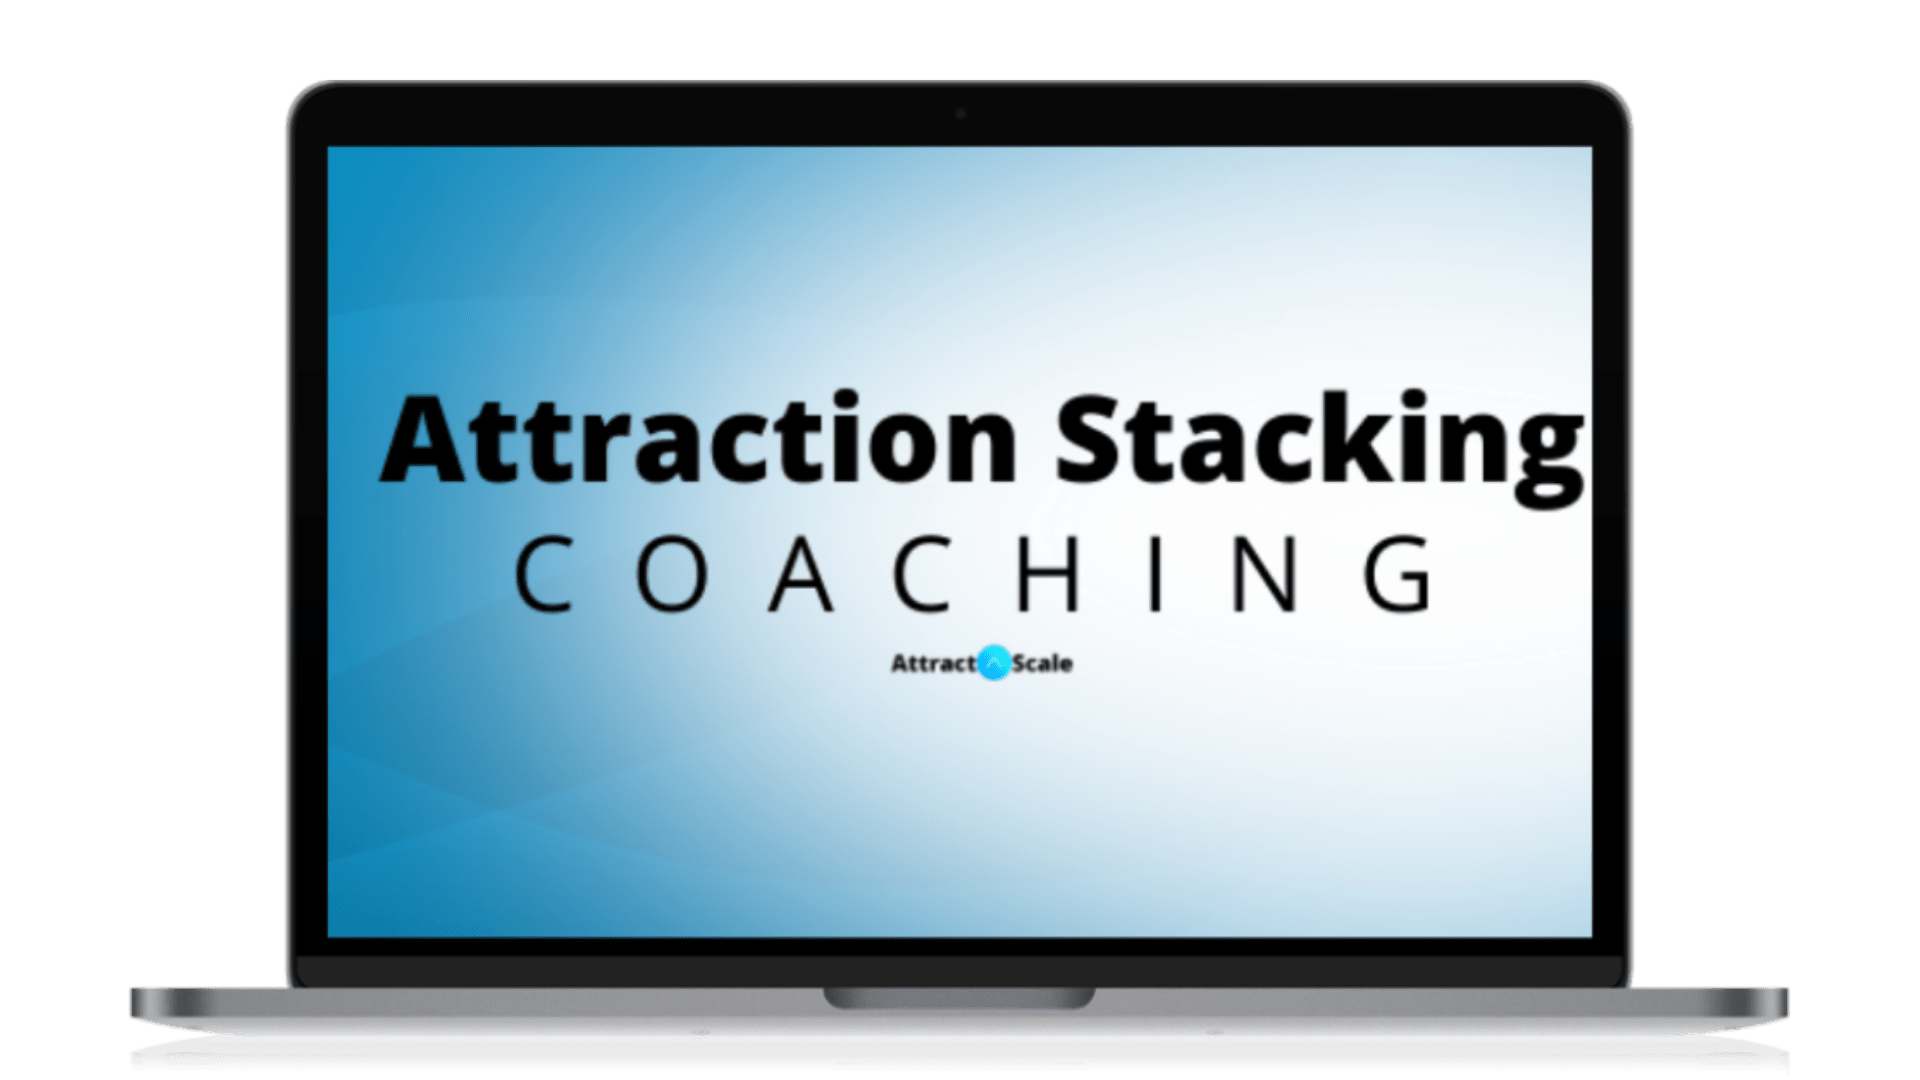 Jared Erni - Attract to Scale - Attraction Stacking Coaching